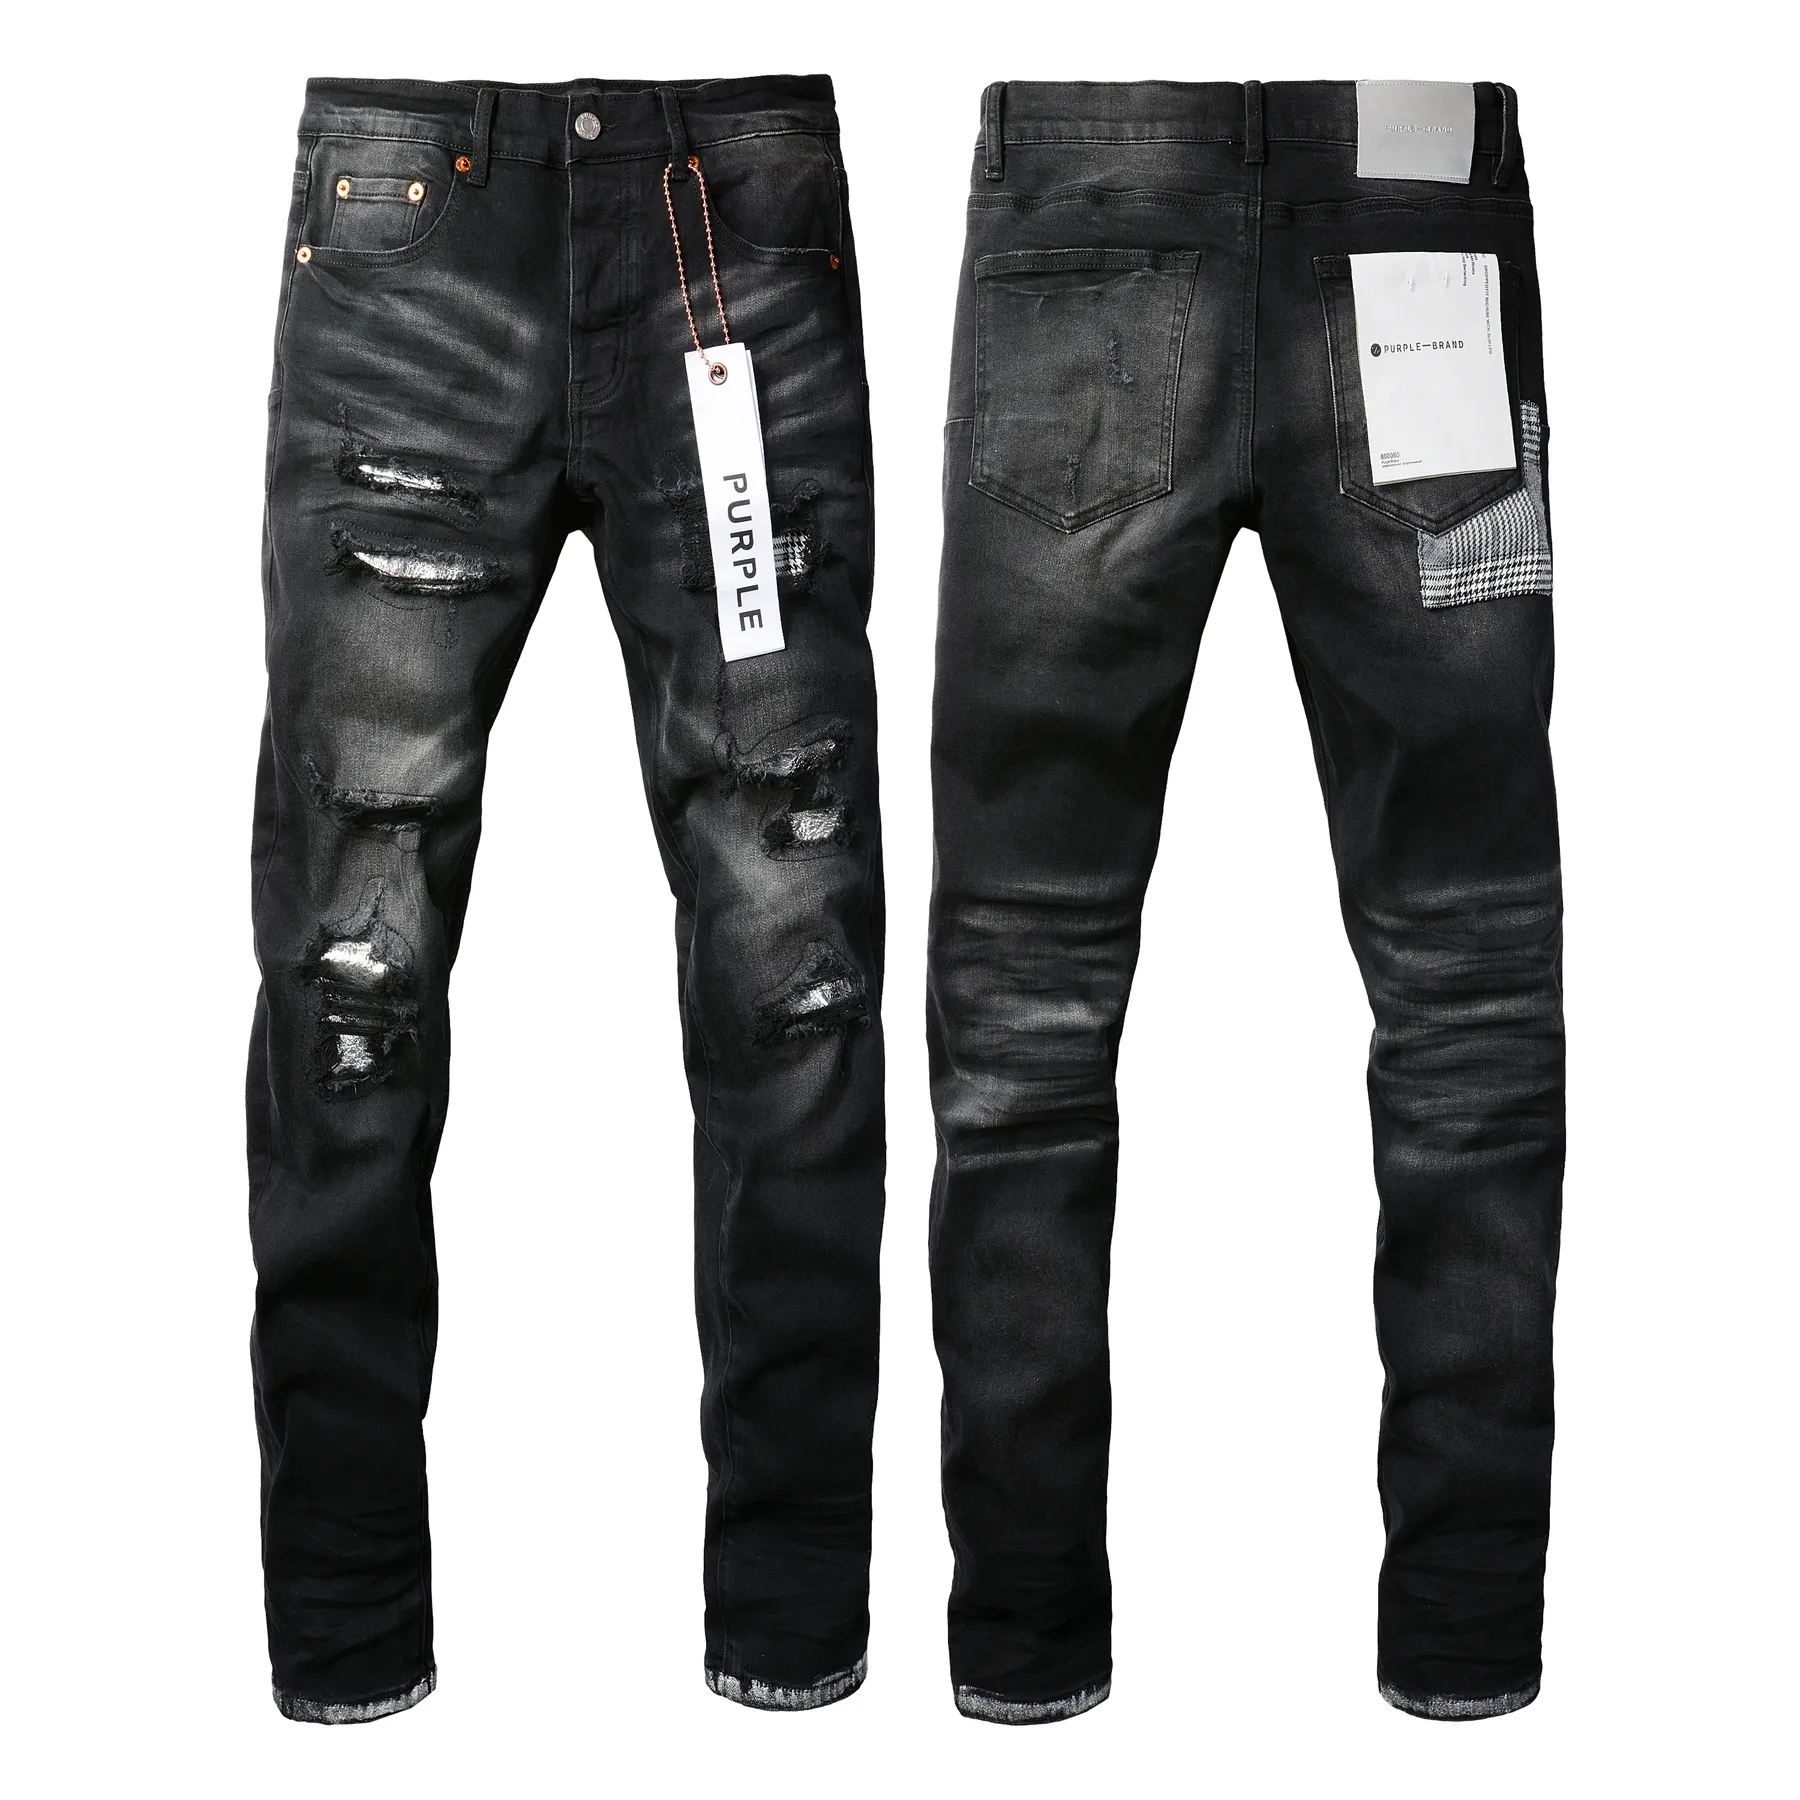 Designer Mens Jeans: Stylish, Durable, And Motorcycle Approved Denim ...